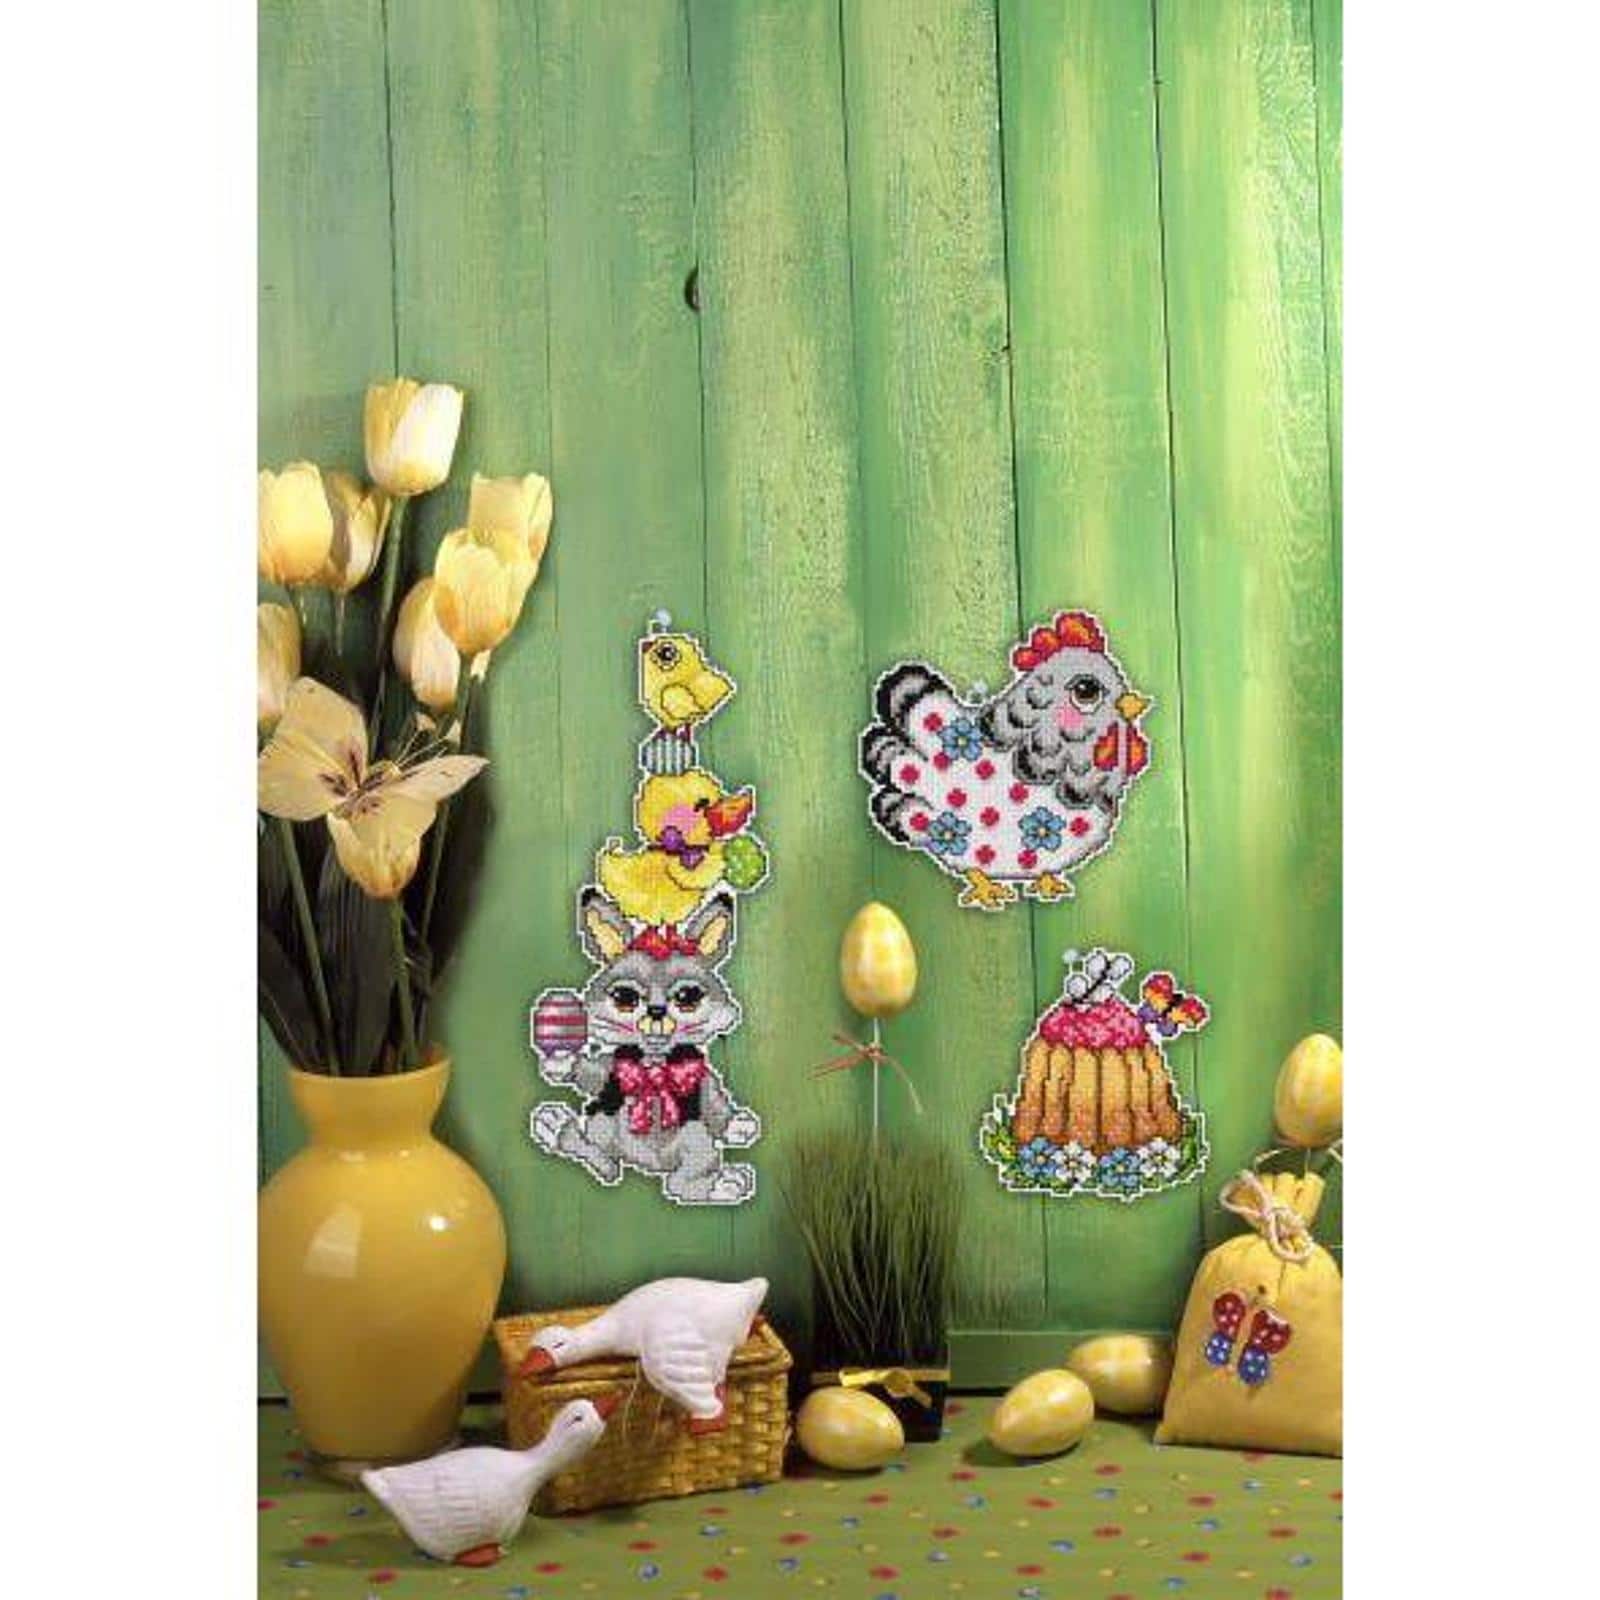 Orchidea Plastic Canvas Counted Cross Stitch Kit With Plastic Canvas Easter Set of 3 Designs